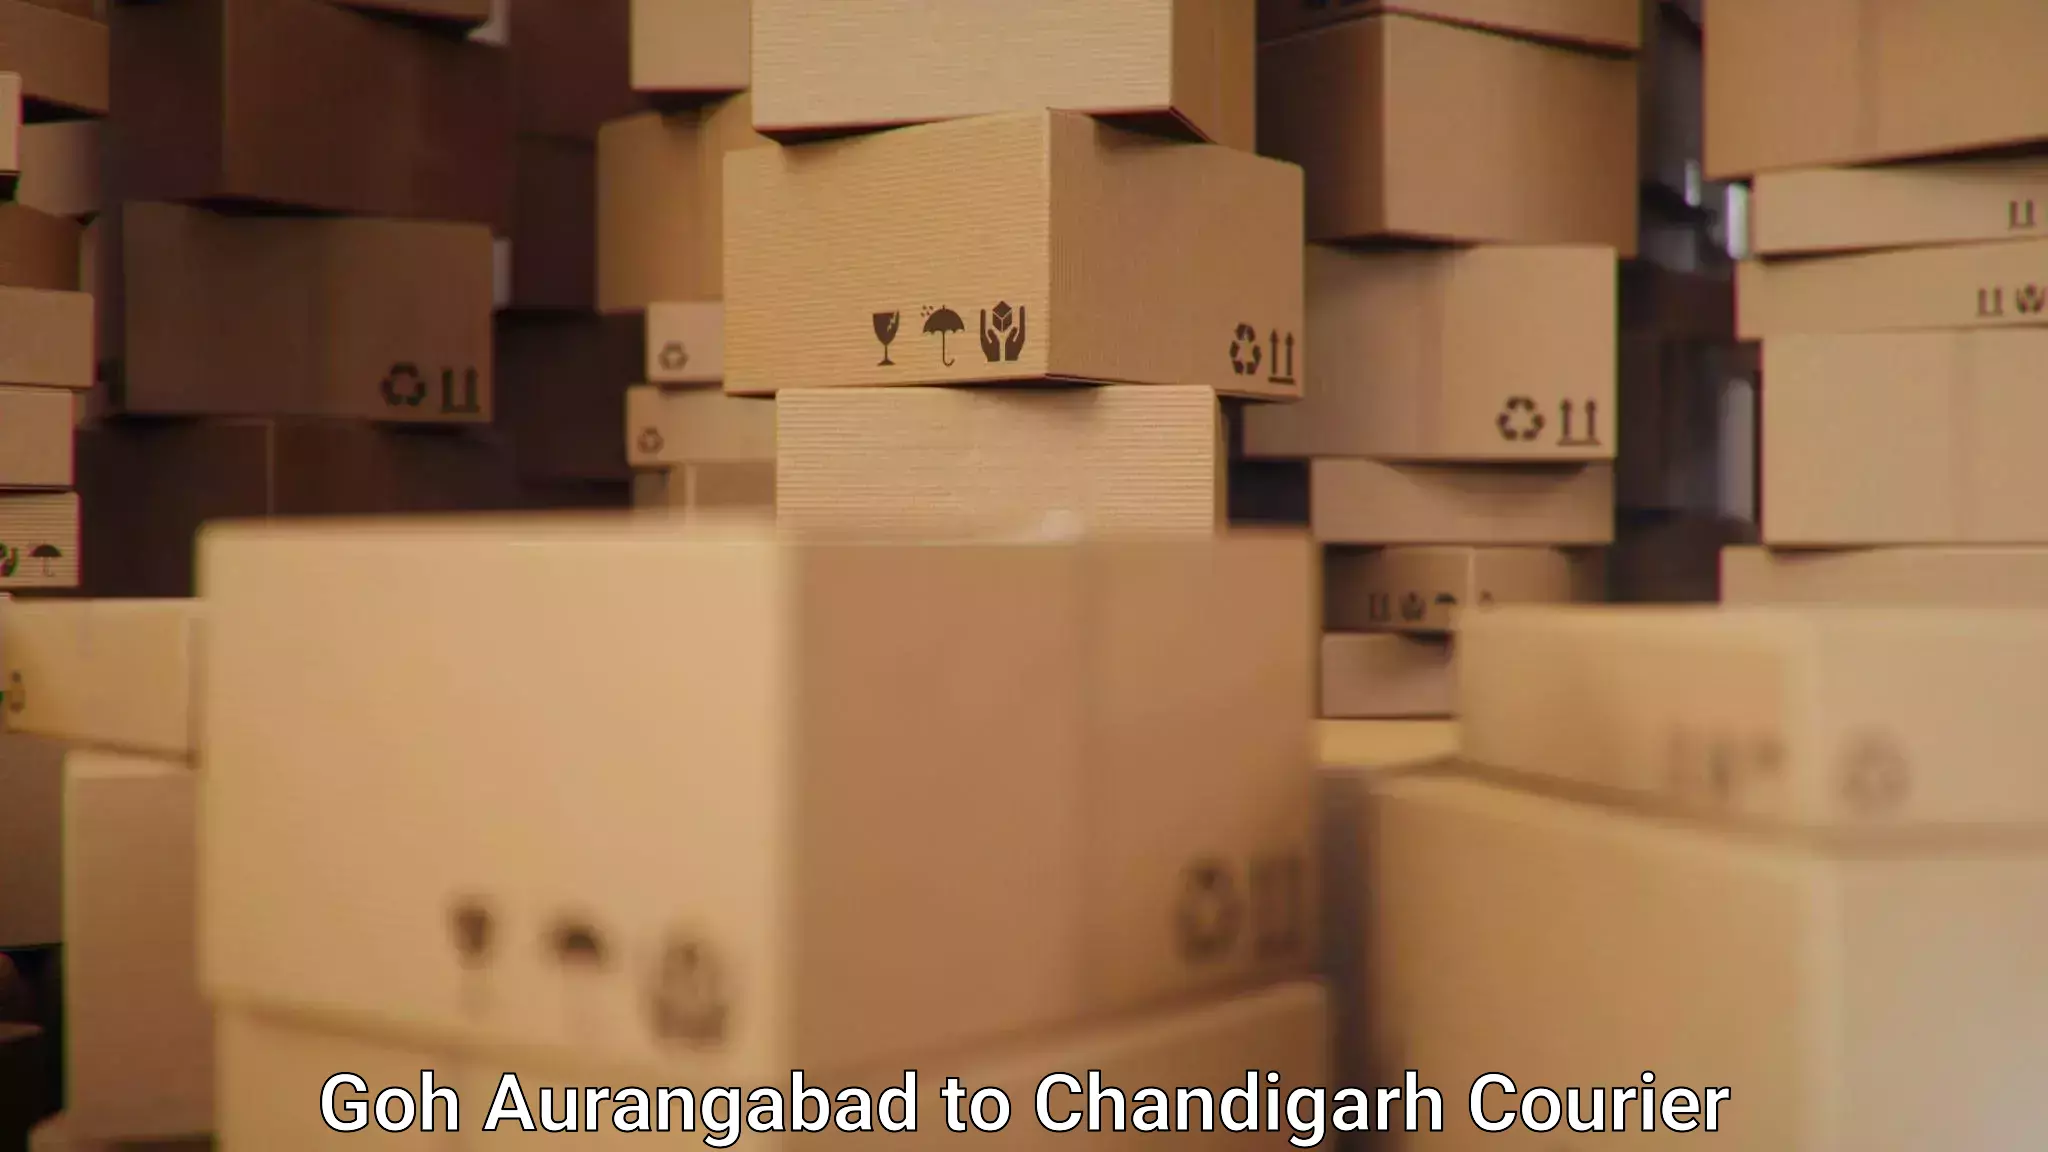 Overnight delivery services Goh Aurangabad to Chandigarh